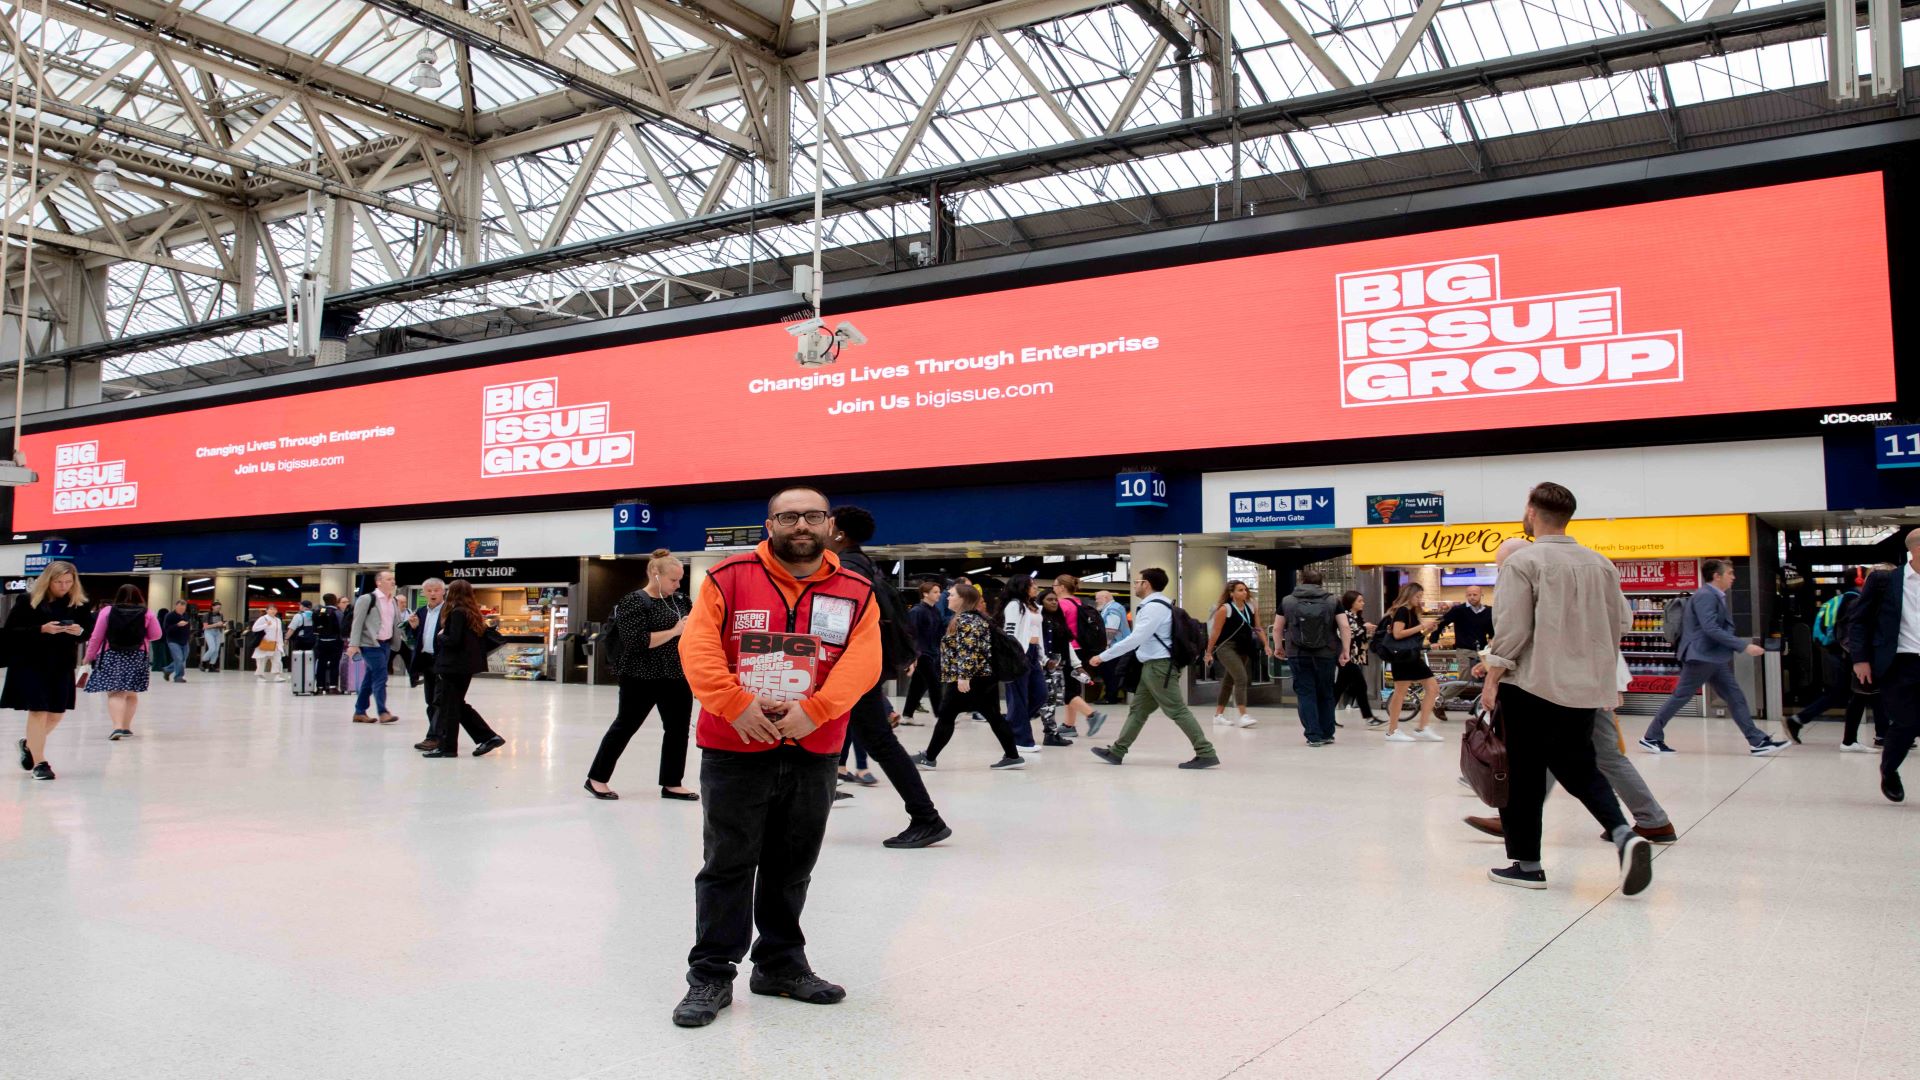 Big Issue Vendor at Waterloo. Credit: Louise Heywood-Schiefer